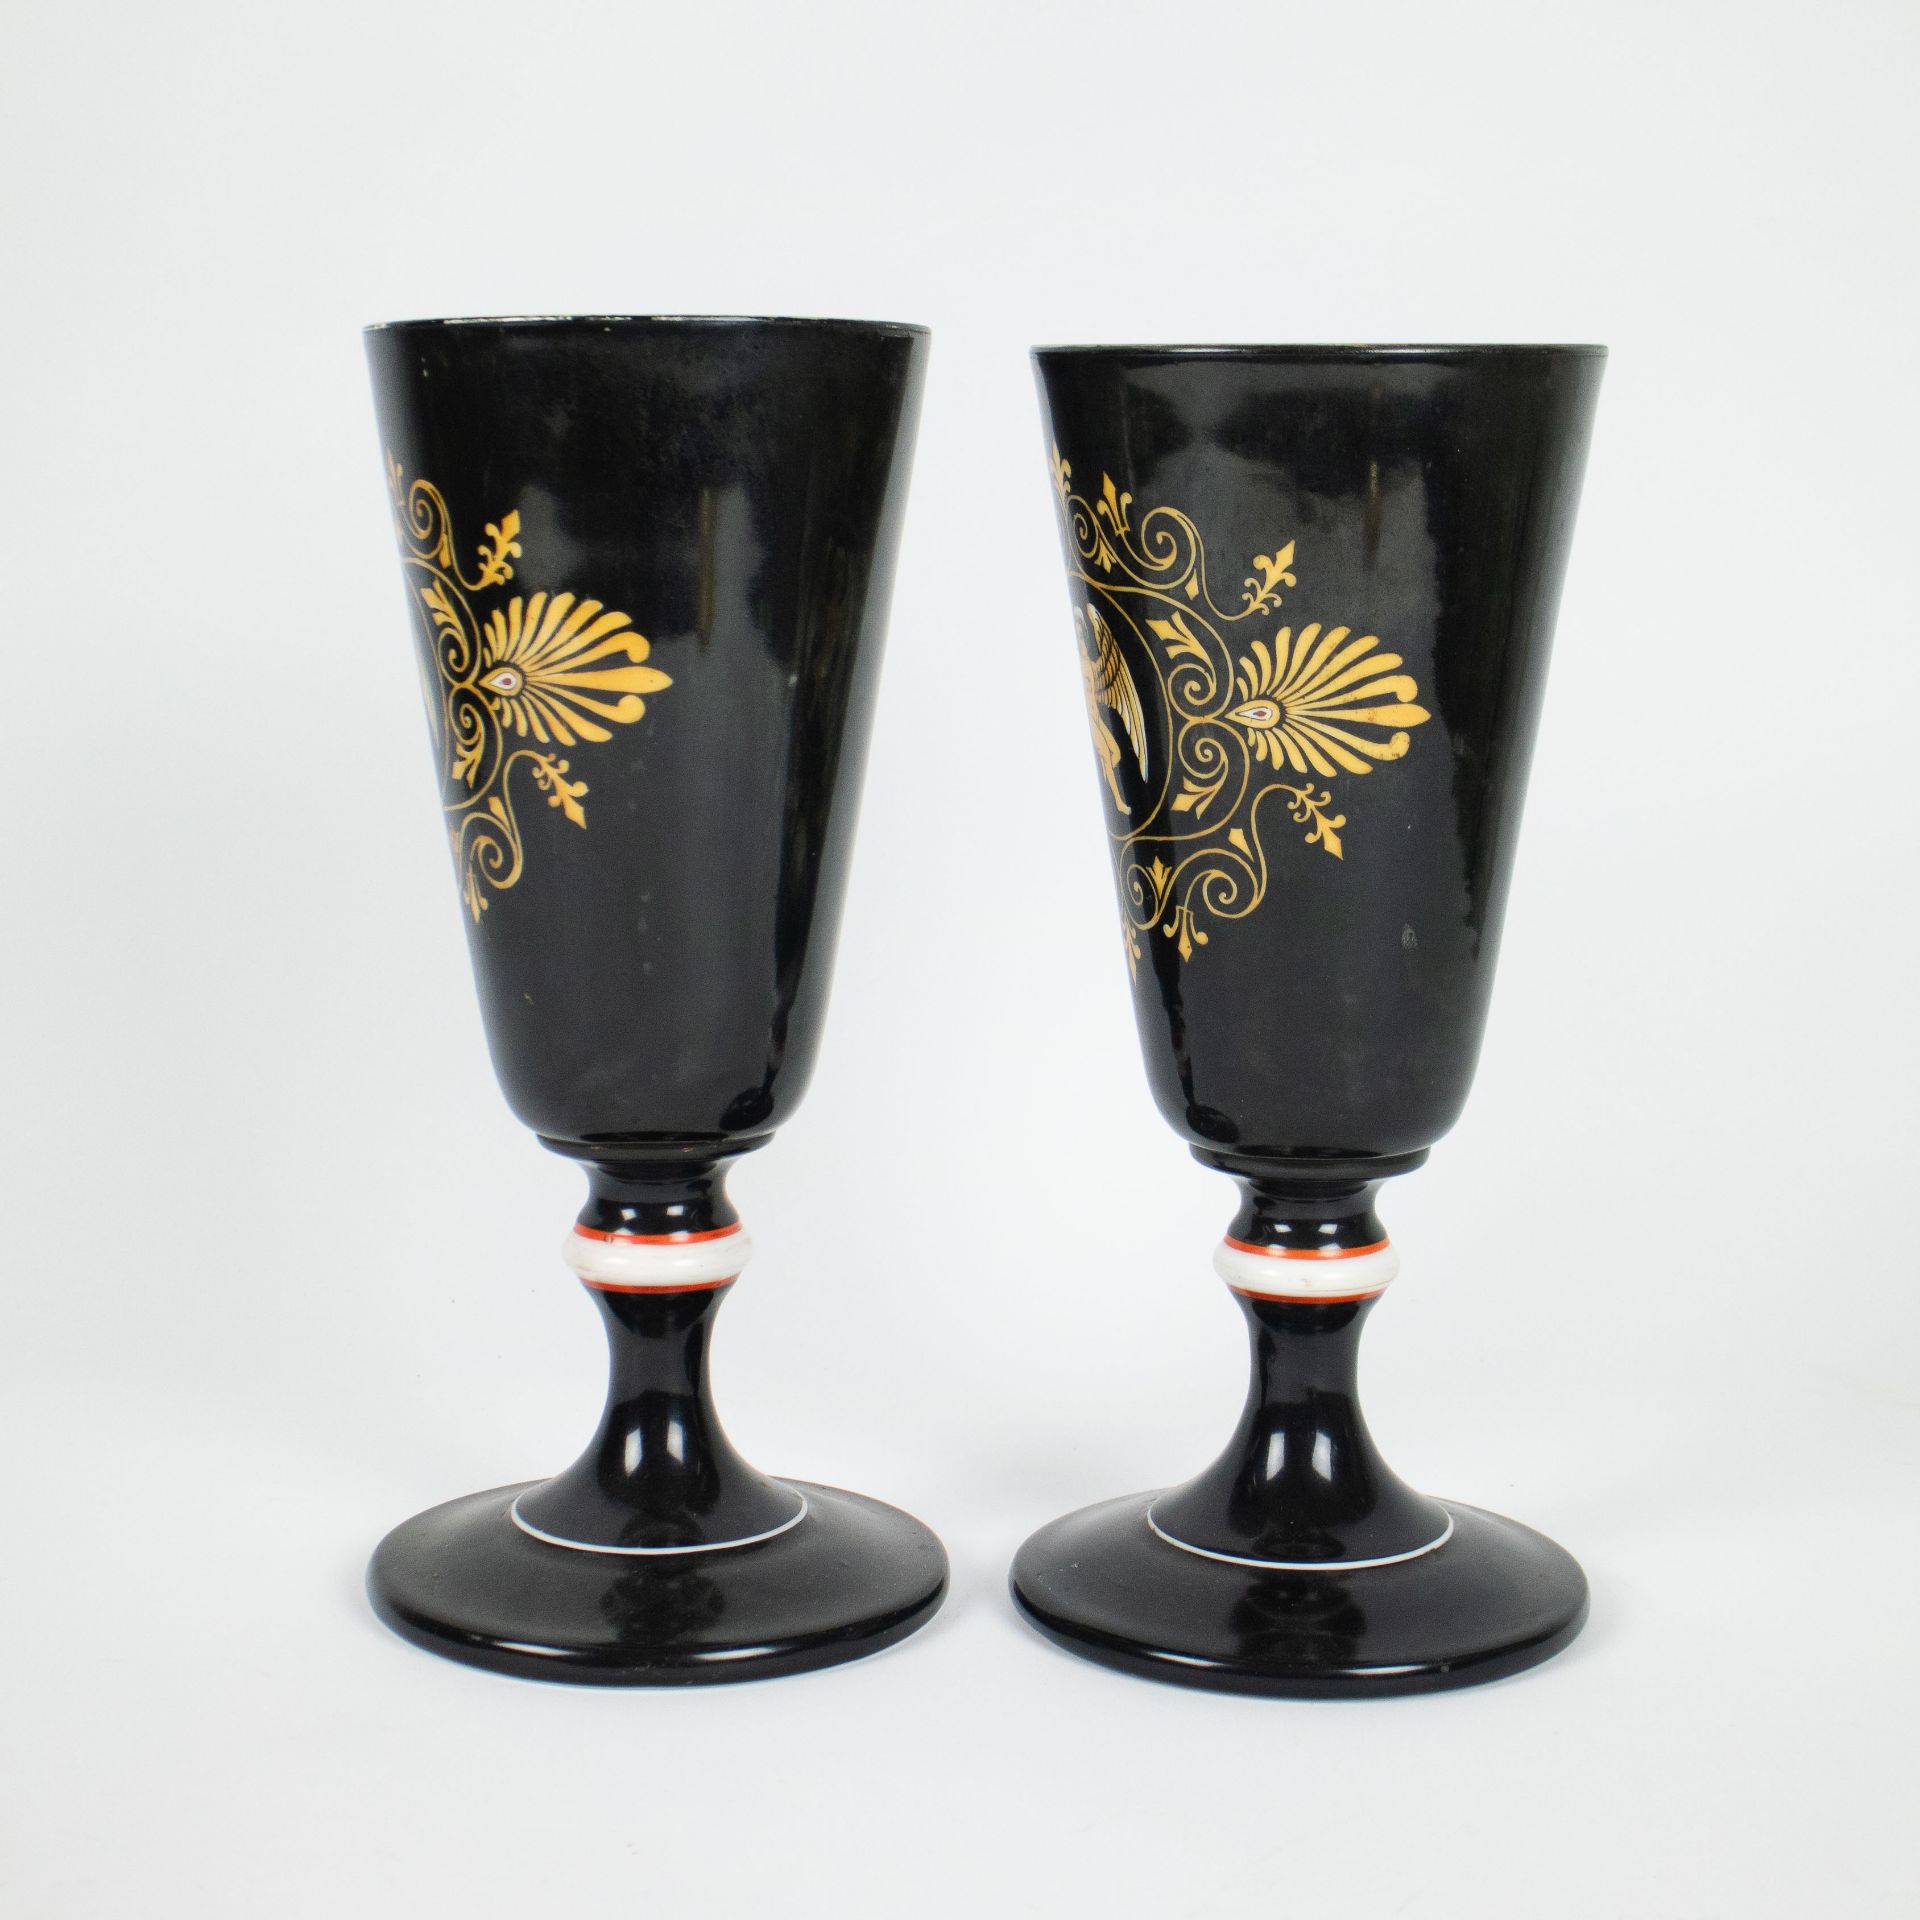 A pair of porcelain vases 19th century - Image 2 of 5